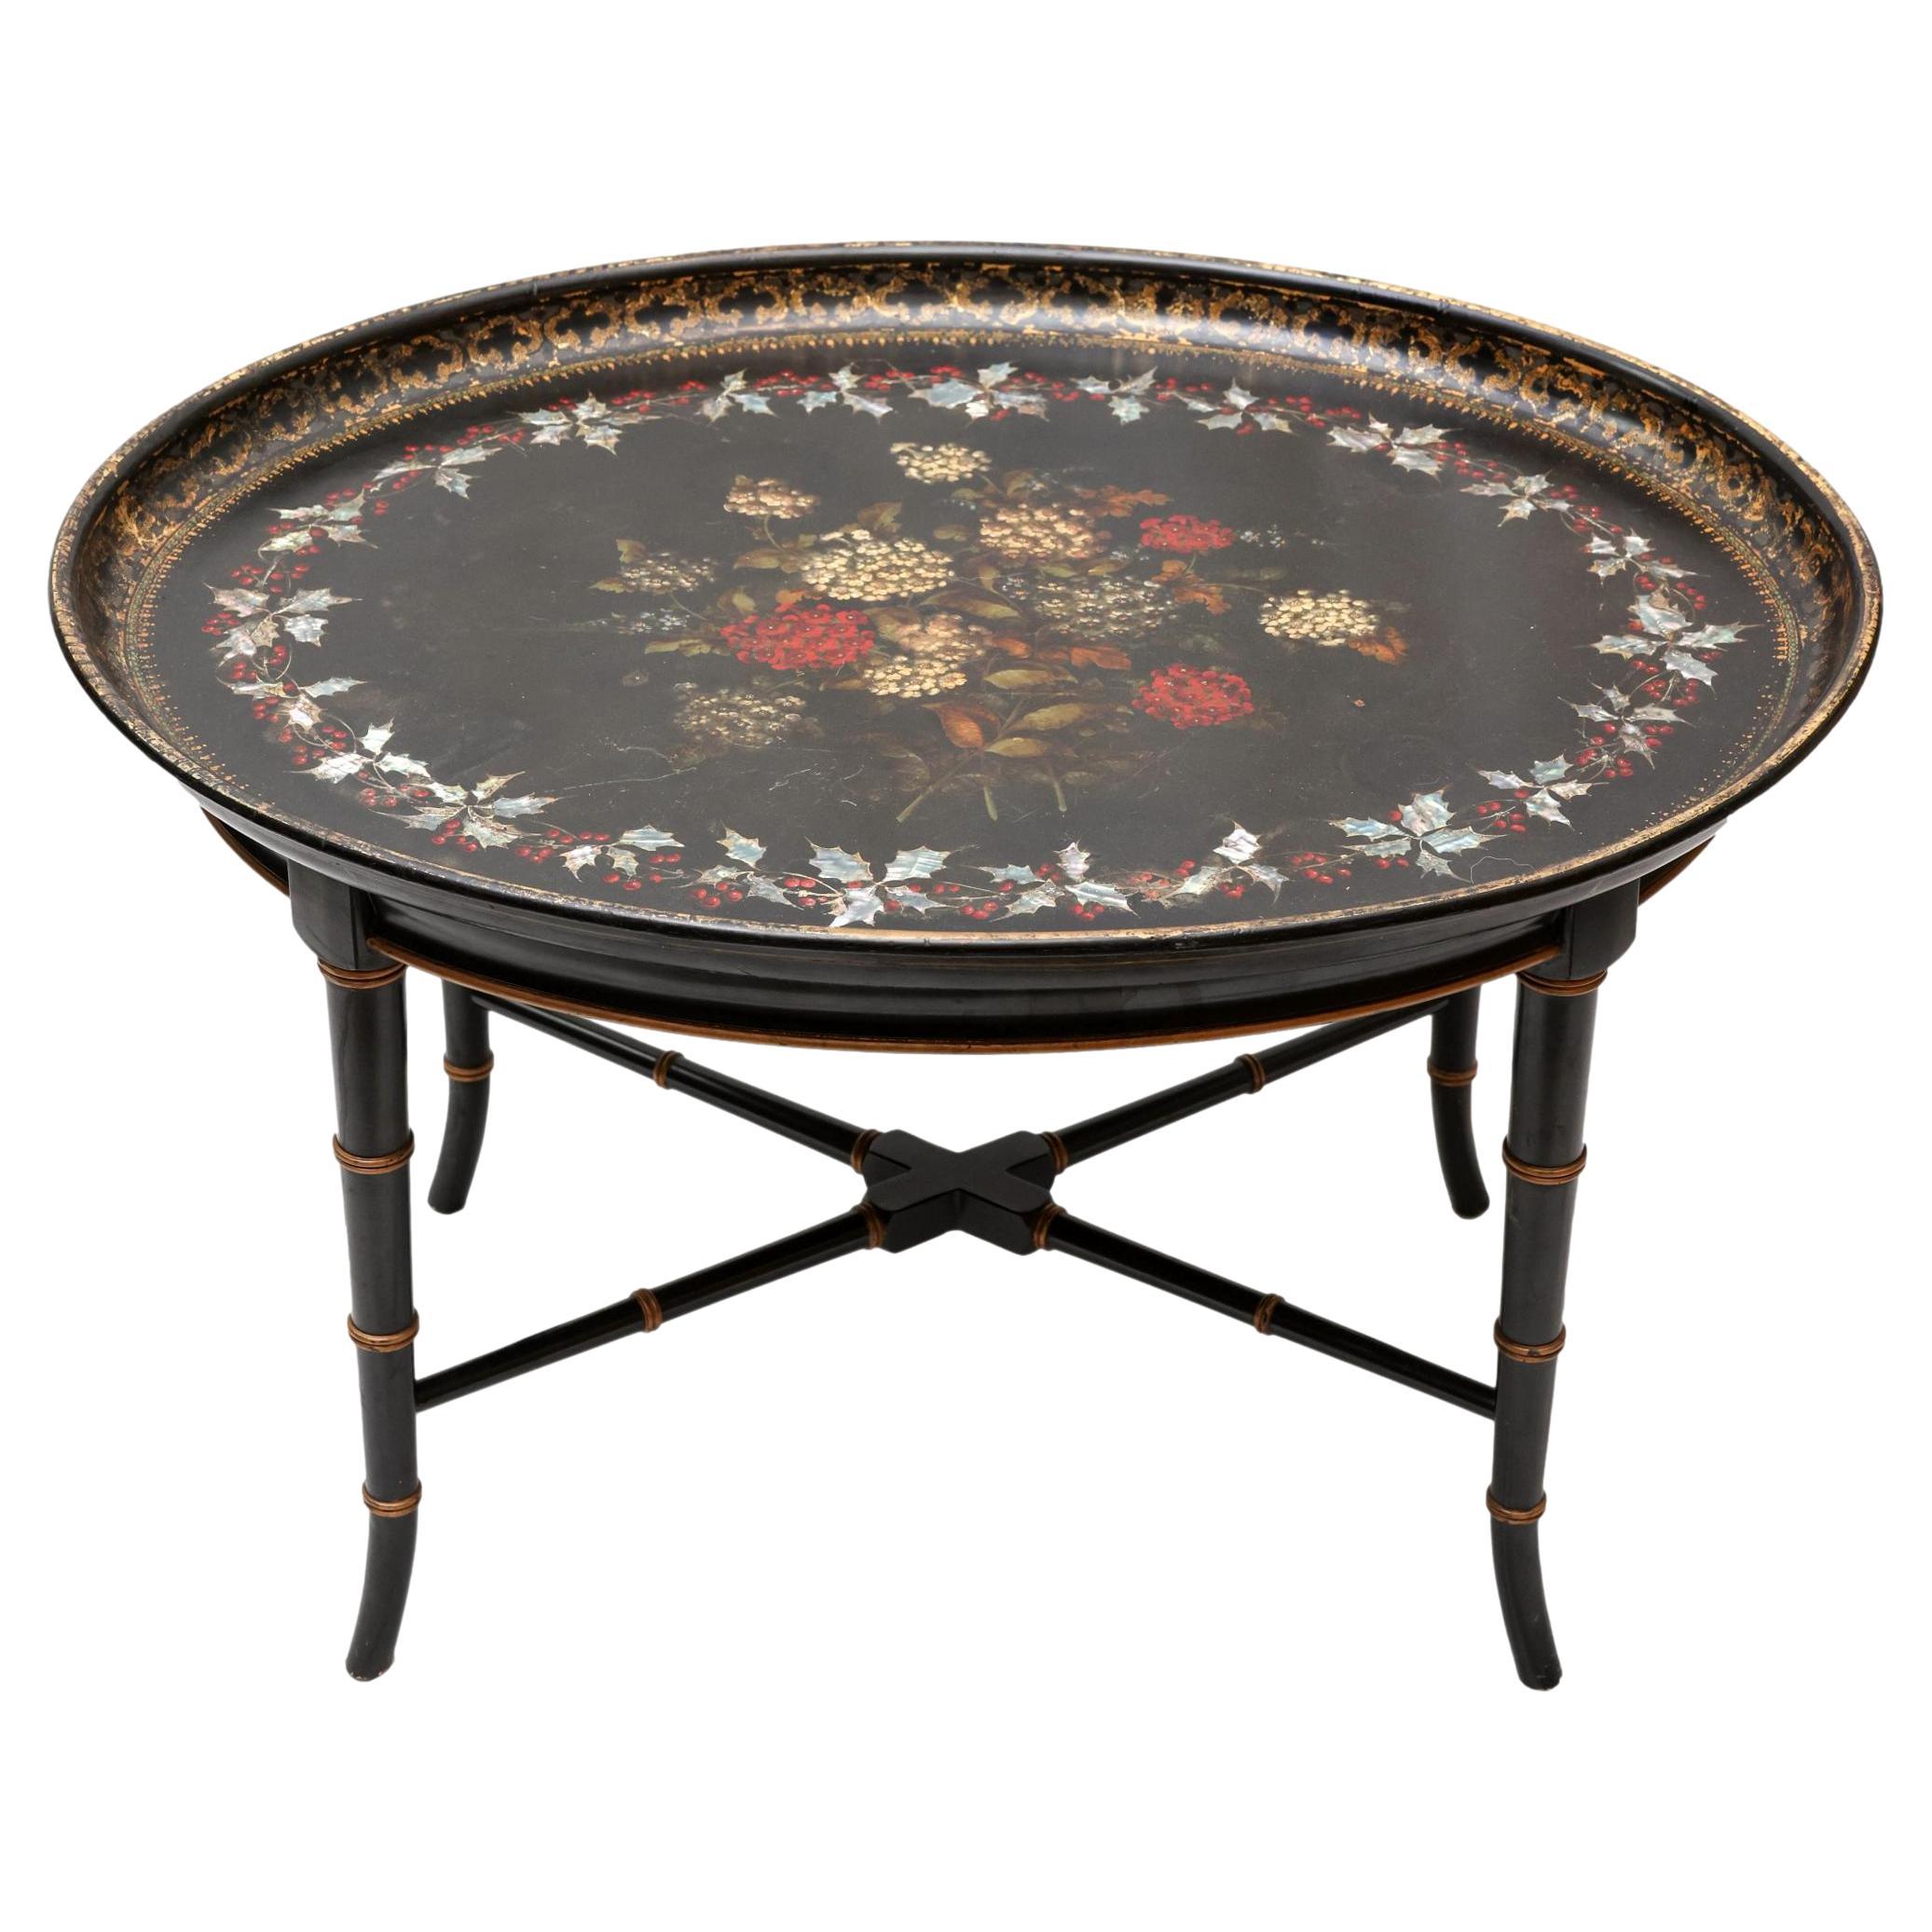 Mother-of-Pearl Inlaid and Ebonized Paper Mache Tray Table, English, ca. 1850 For Sale